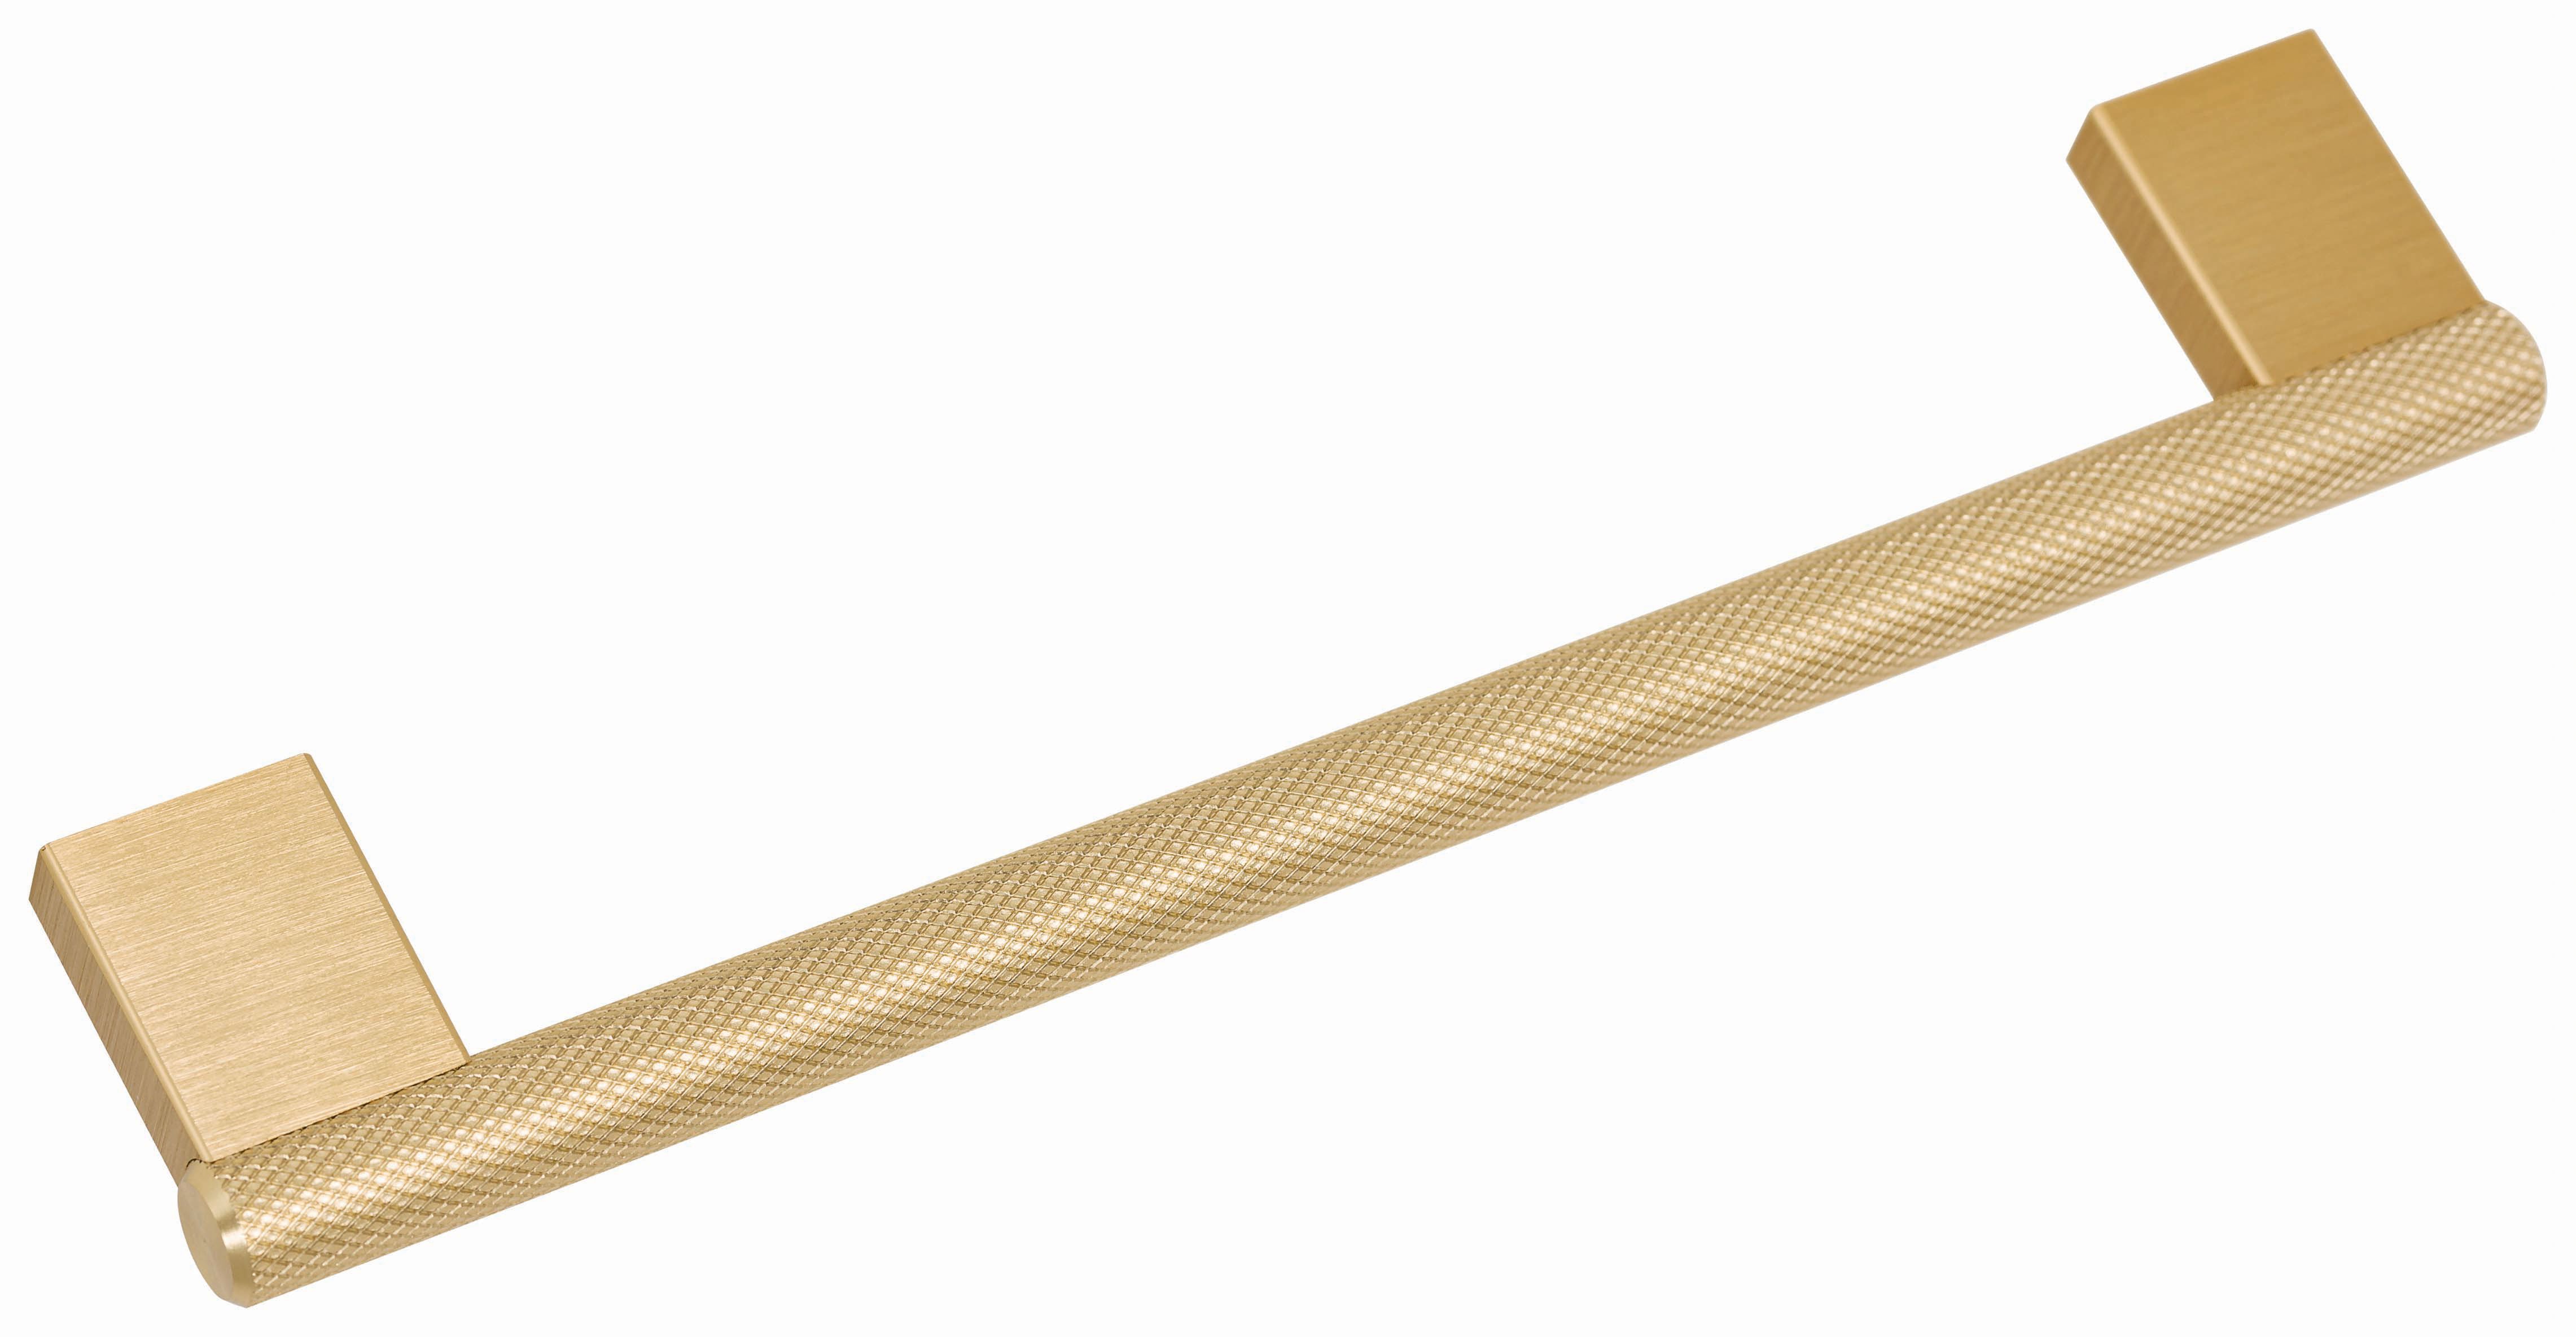 Image of Dalston Textured Bar Handle Brass 278 mm